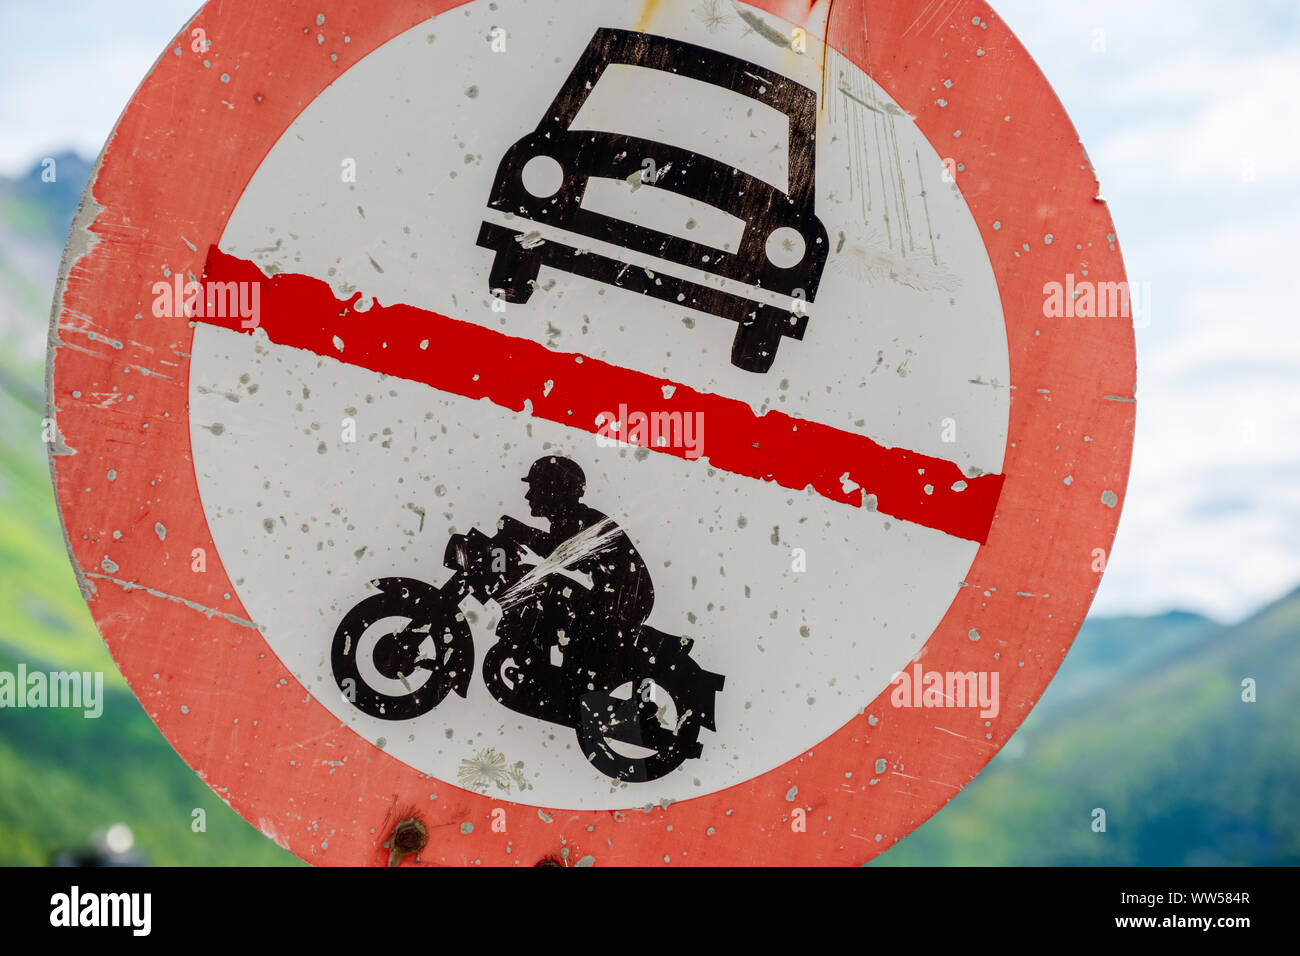 Old-fashioned Trafficsign No permission for Cars and Motorbikes in red, black and white Stock Photo